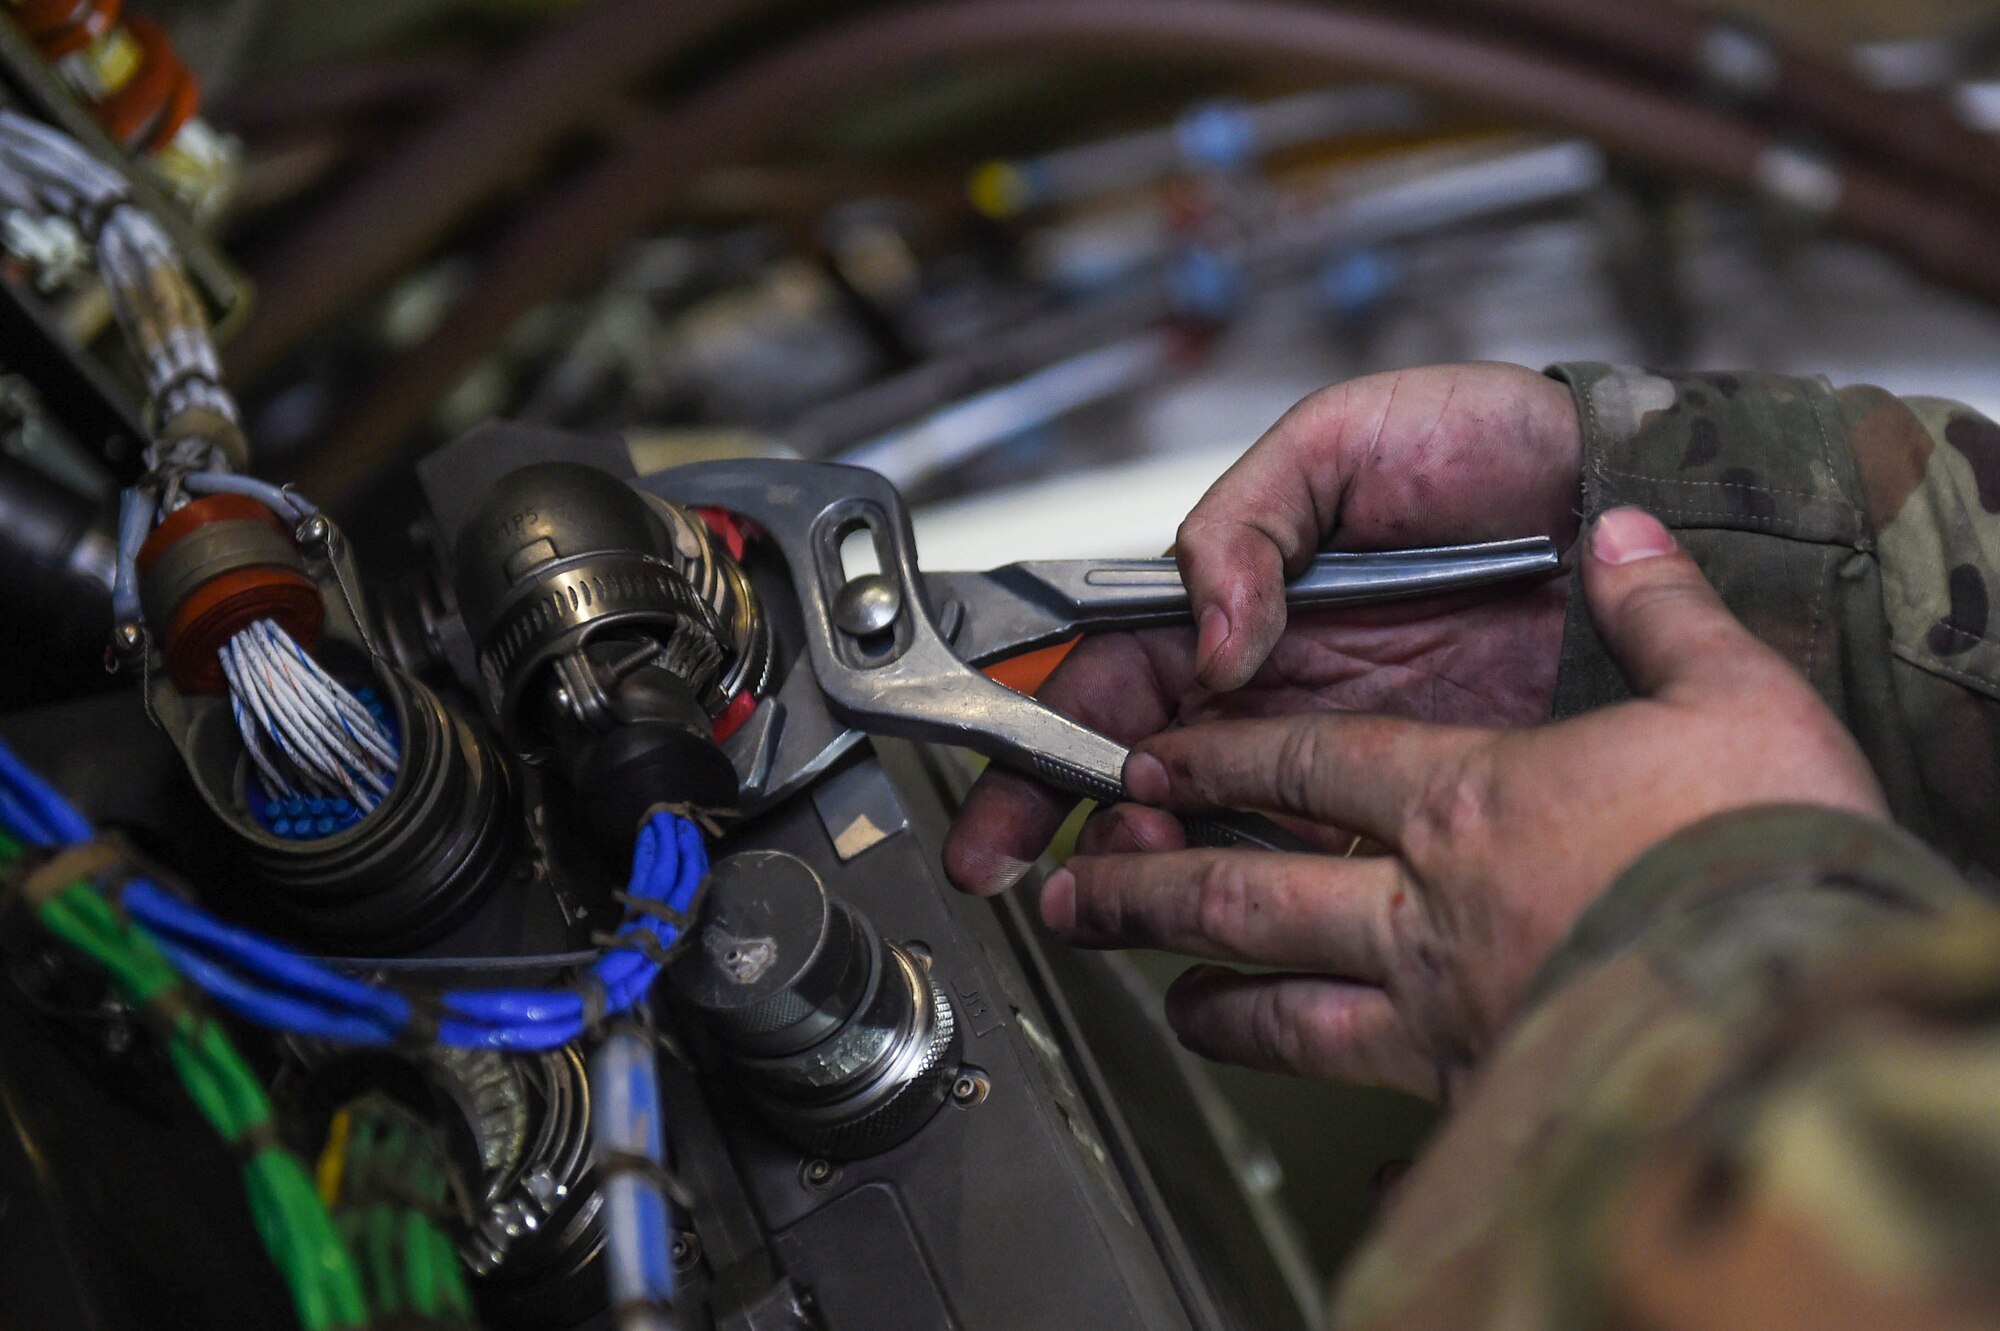 Staff Sgt. Jonathan Daniels, 62nd Maintenance Squadron jet mechanic, tightens a part on the electronic engine system for a C-17 Globemaster III on Joint Base Lewis-McChord, Wash., May 20, 2020. Jet mechanics specialize in work on the engines of C-17s, whereas crew chiefs conduct maintenance on other areas of the aircraft. (U.S. Air Force photo by Airman 1st Class Mikayla Heineck)